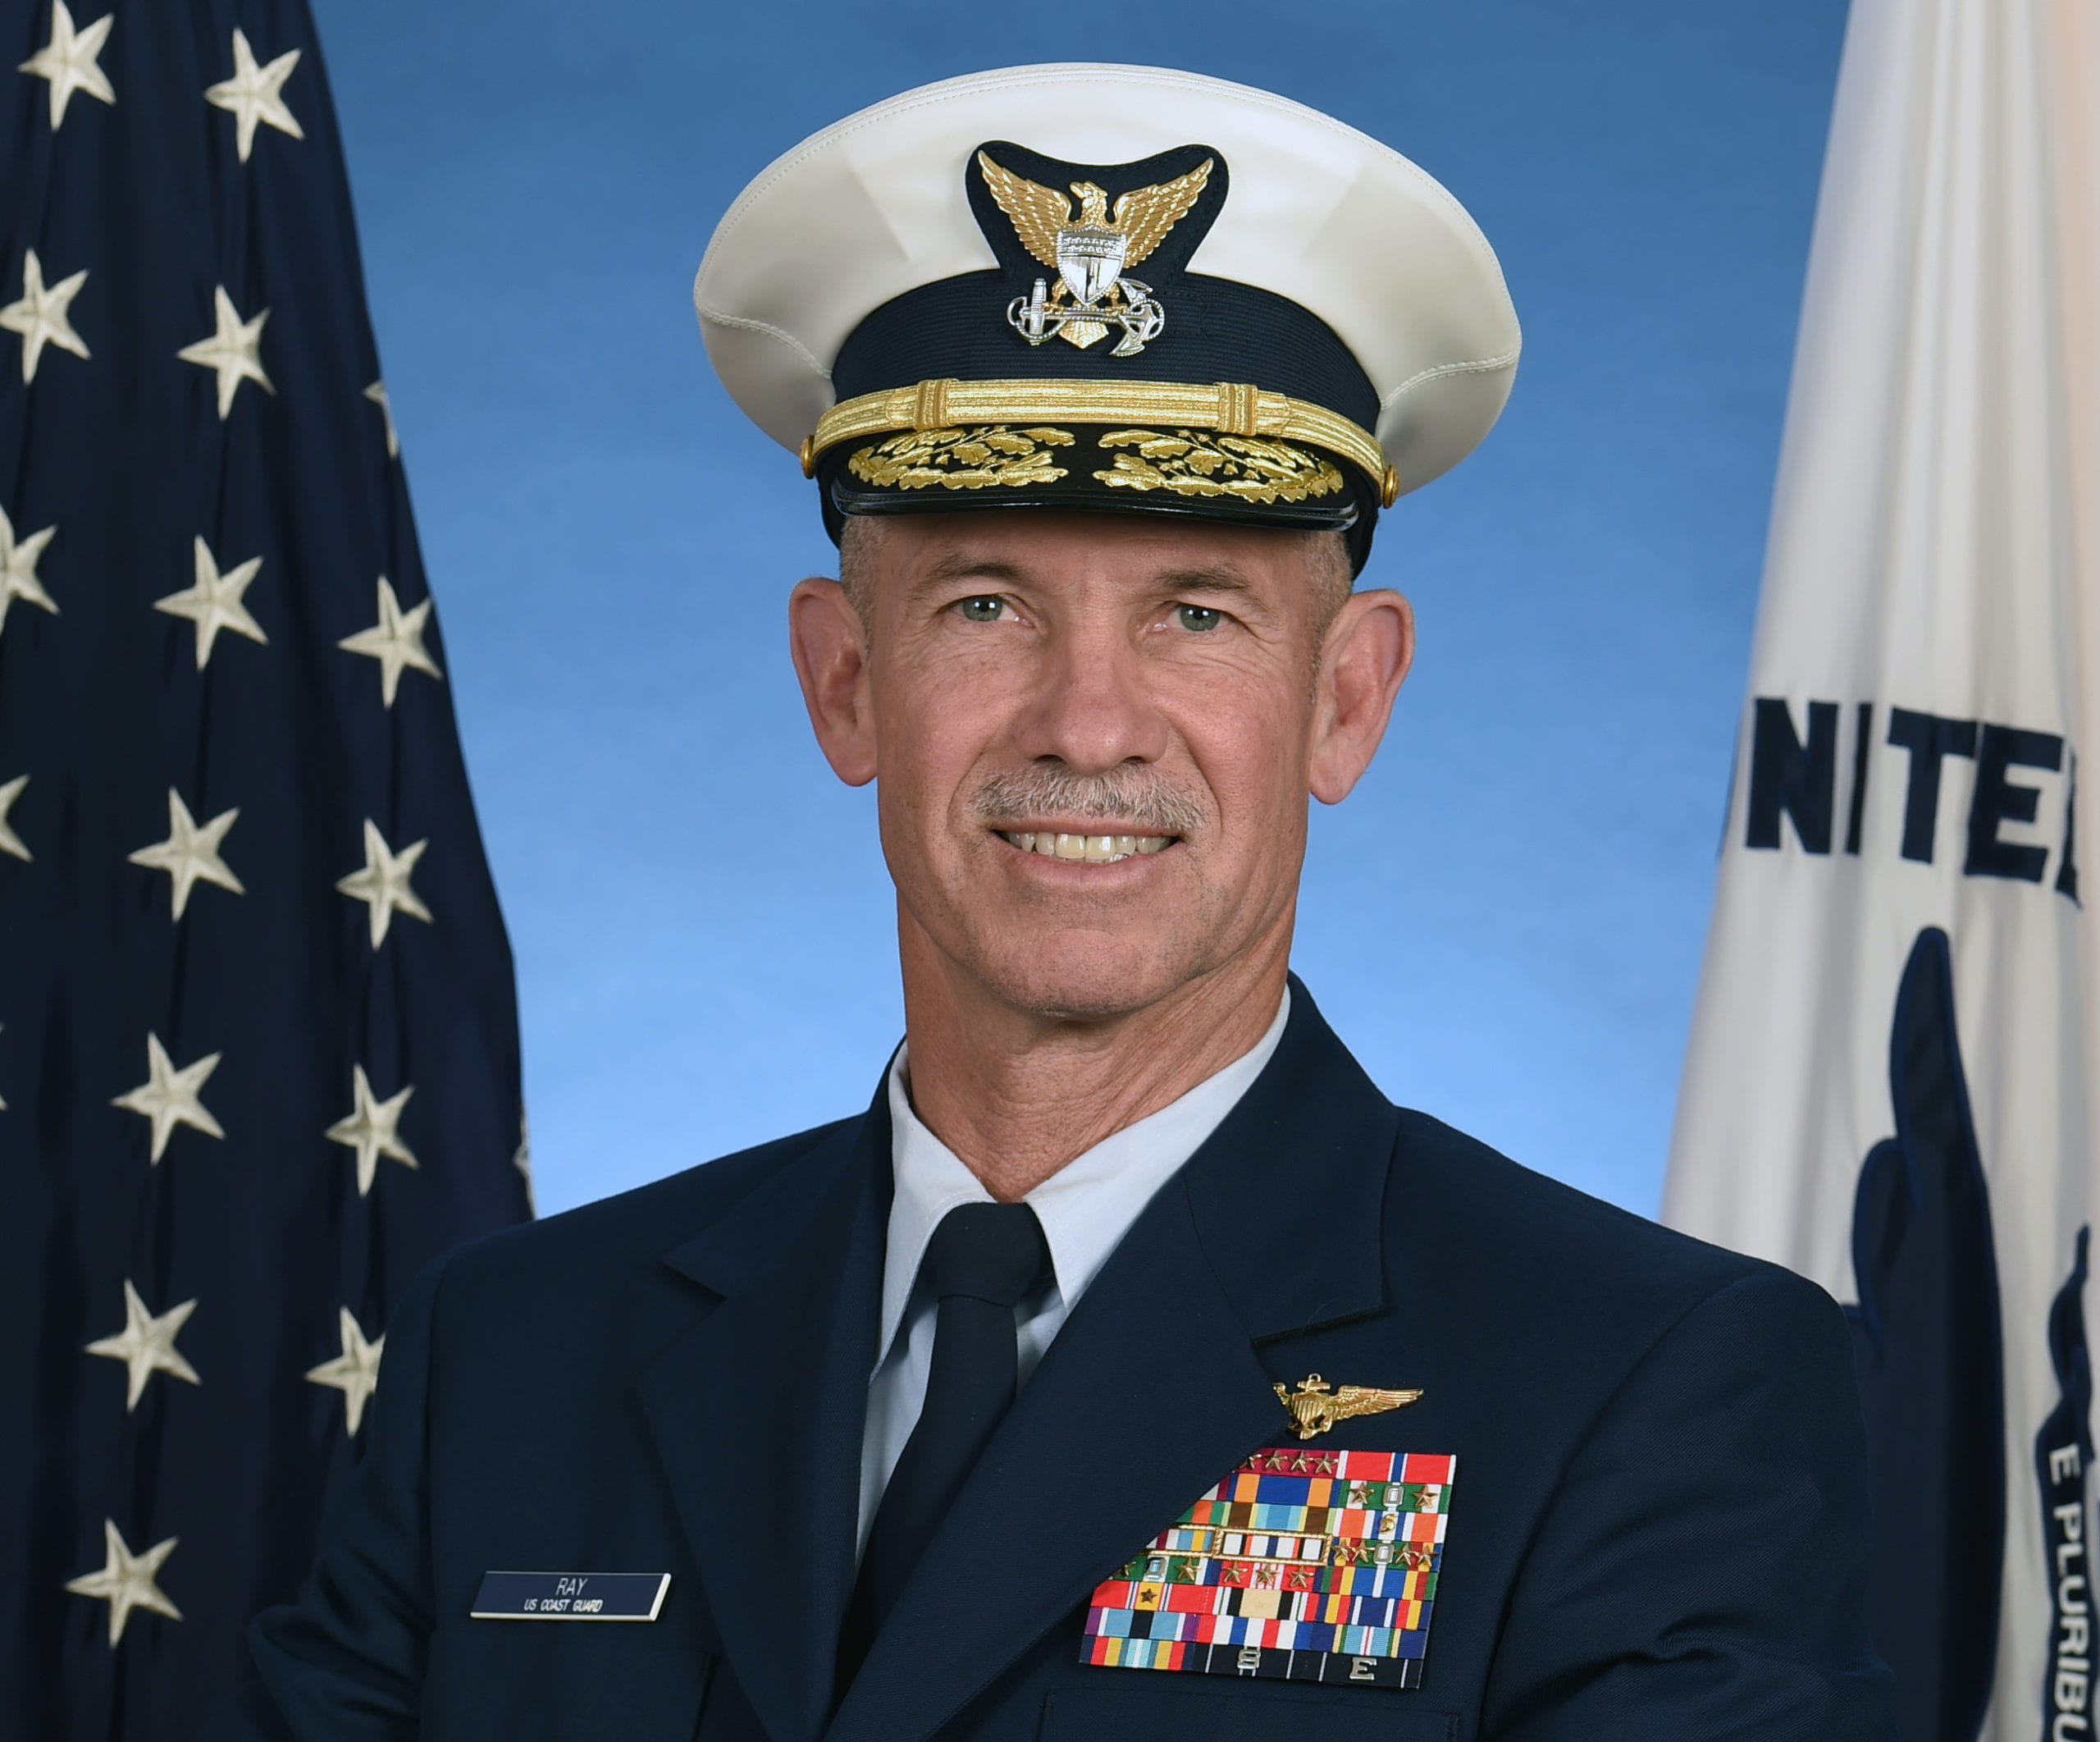 U.S. Military Top Brass Self-Isolating After Coast Guard No.2